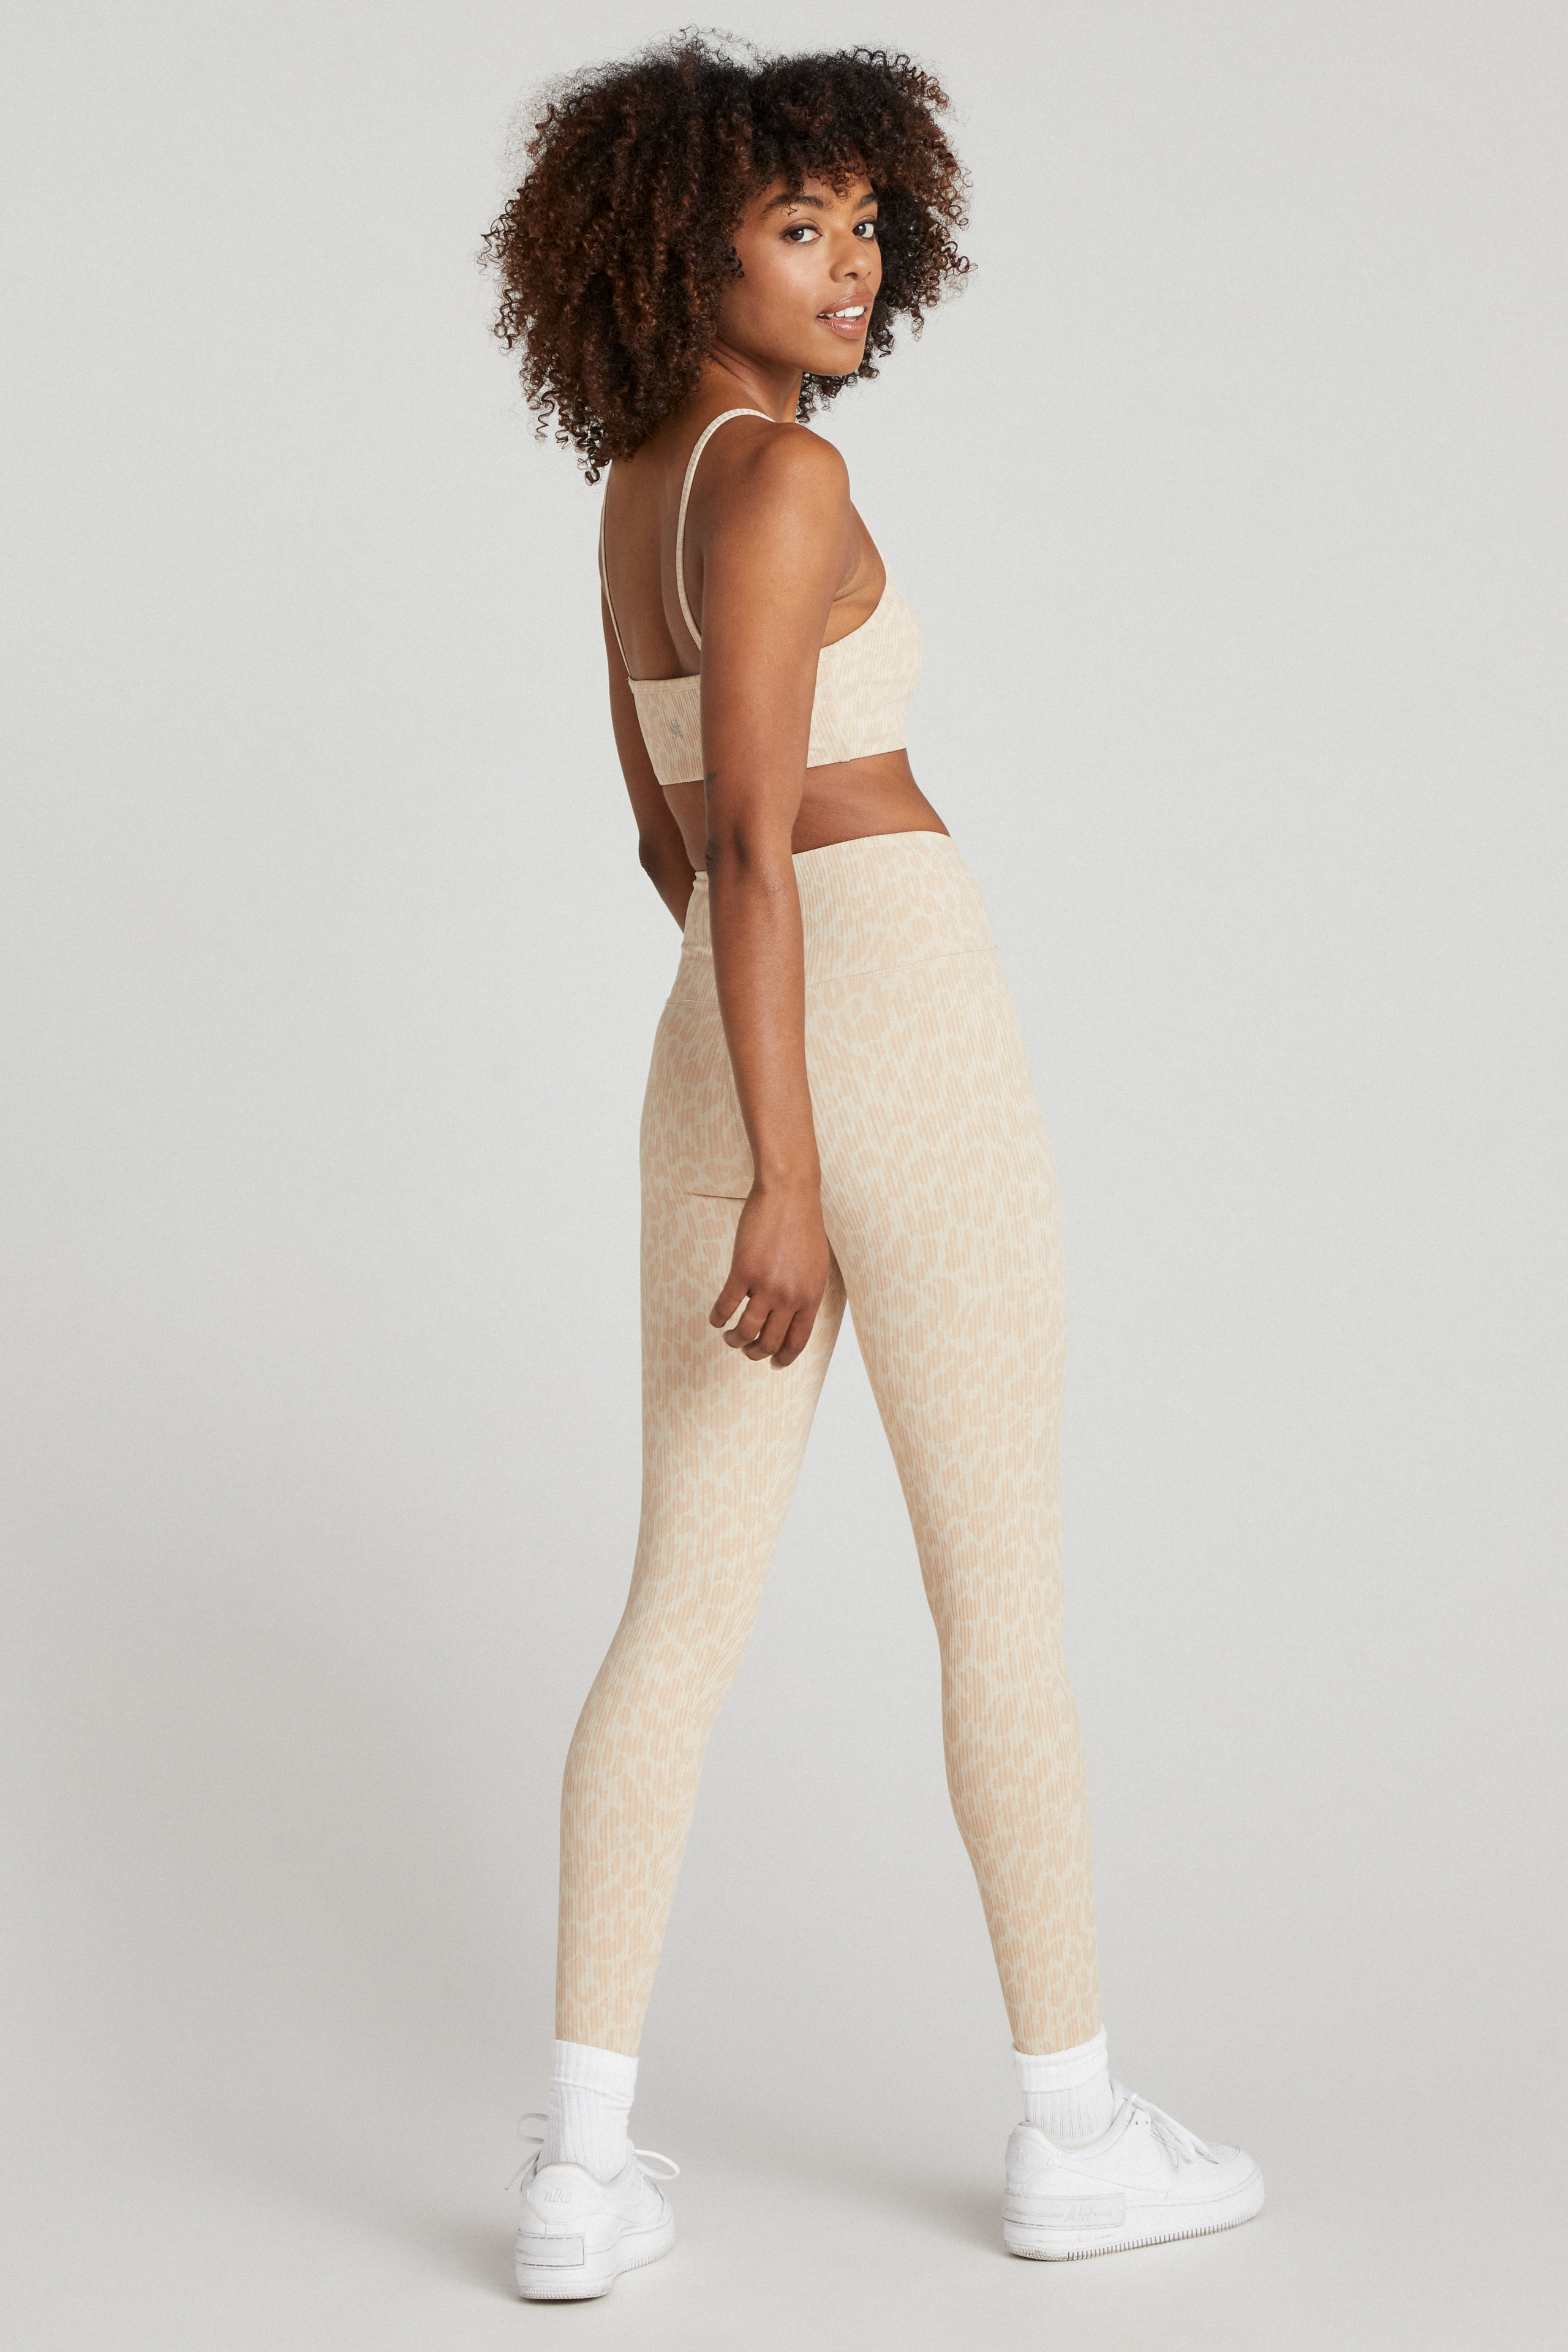 Ice Cream Leggings Ethically Made T-Shirts, Hoodies, Jumpers & More!